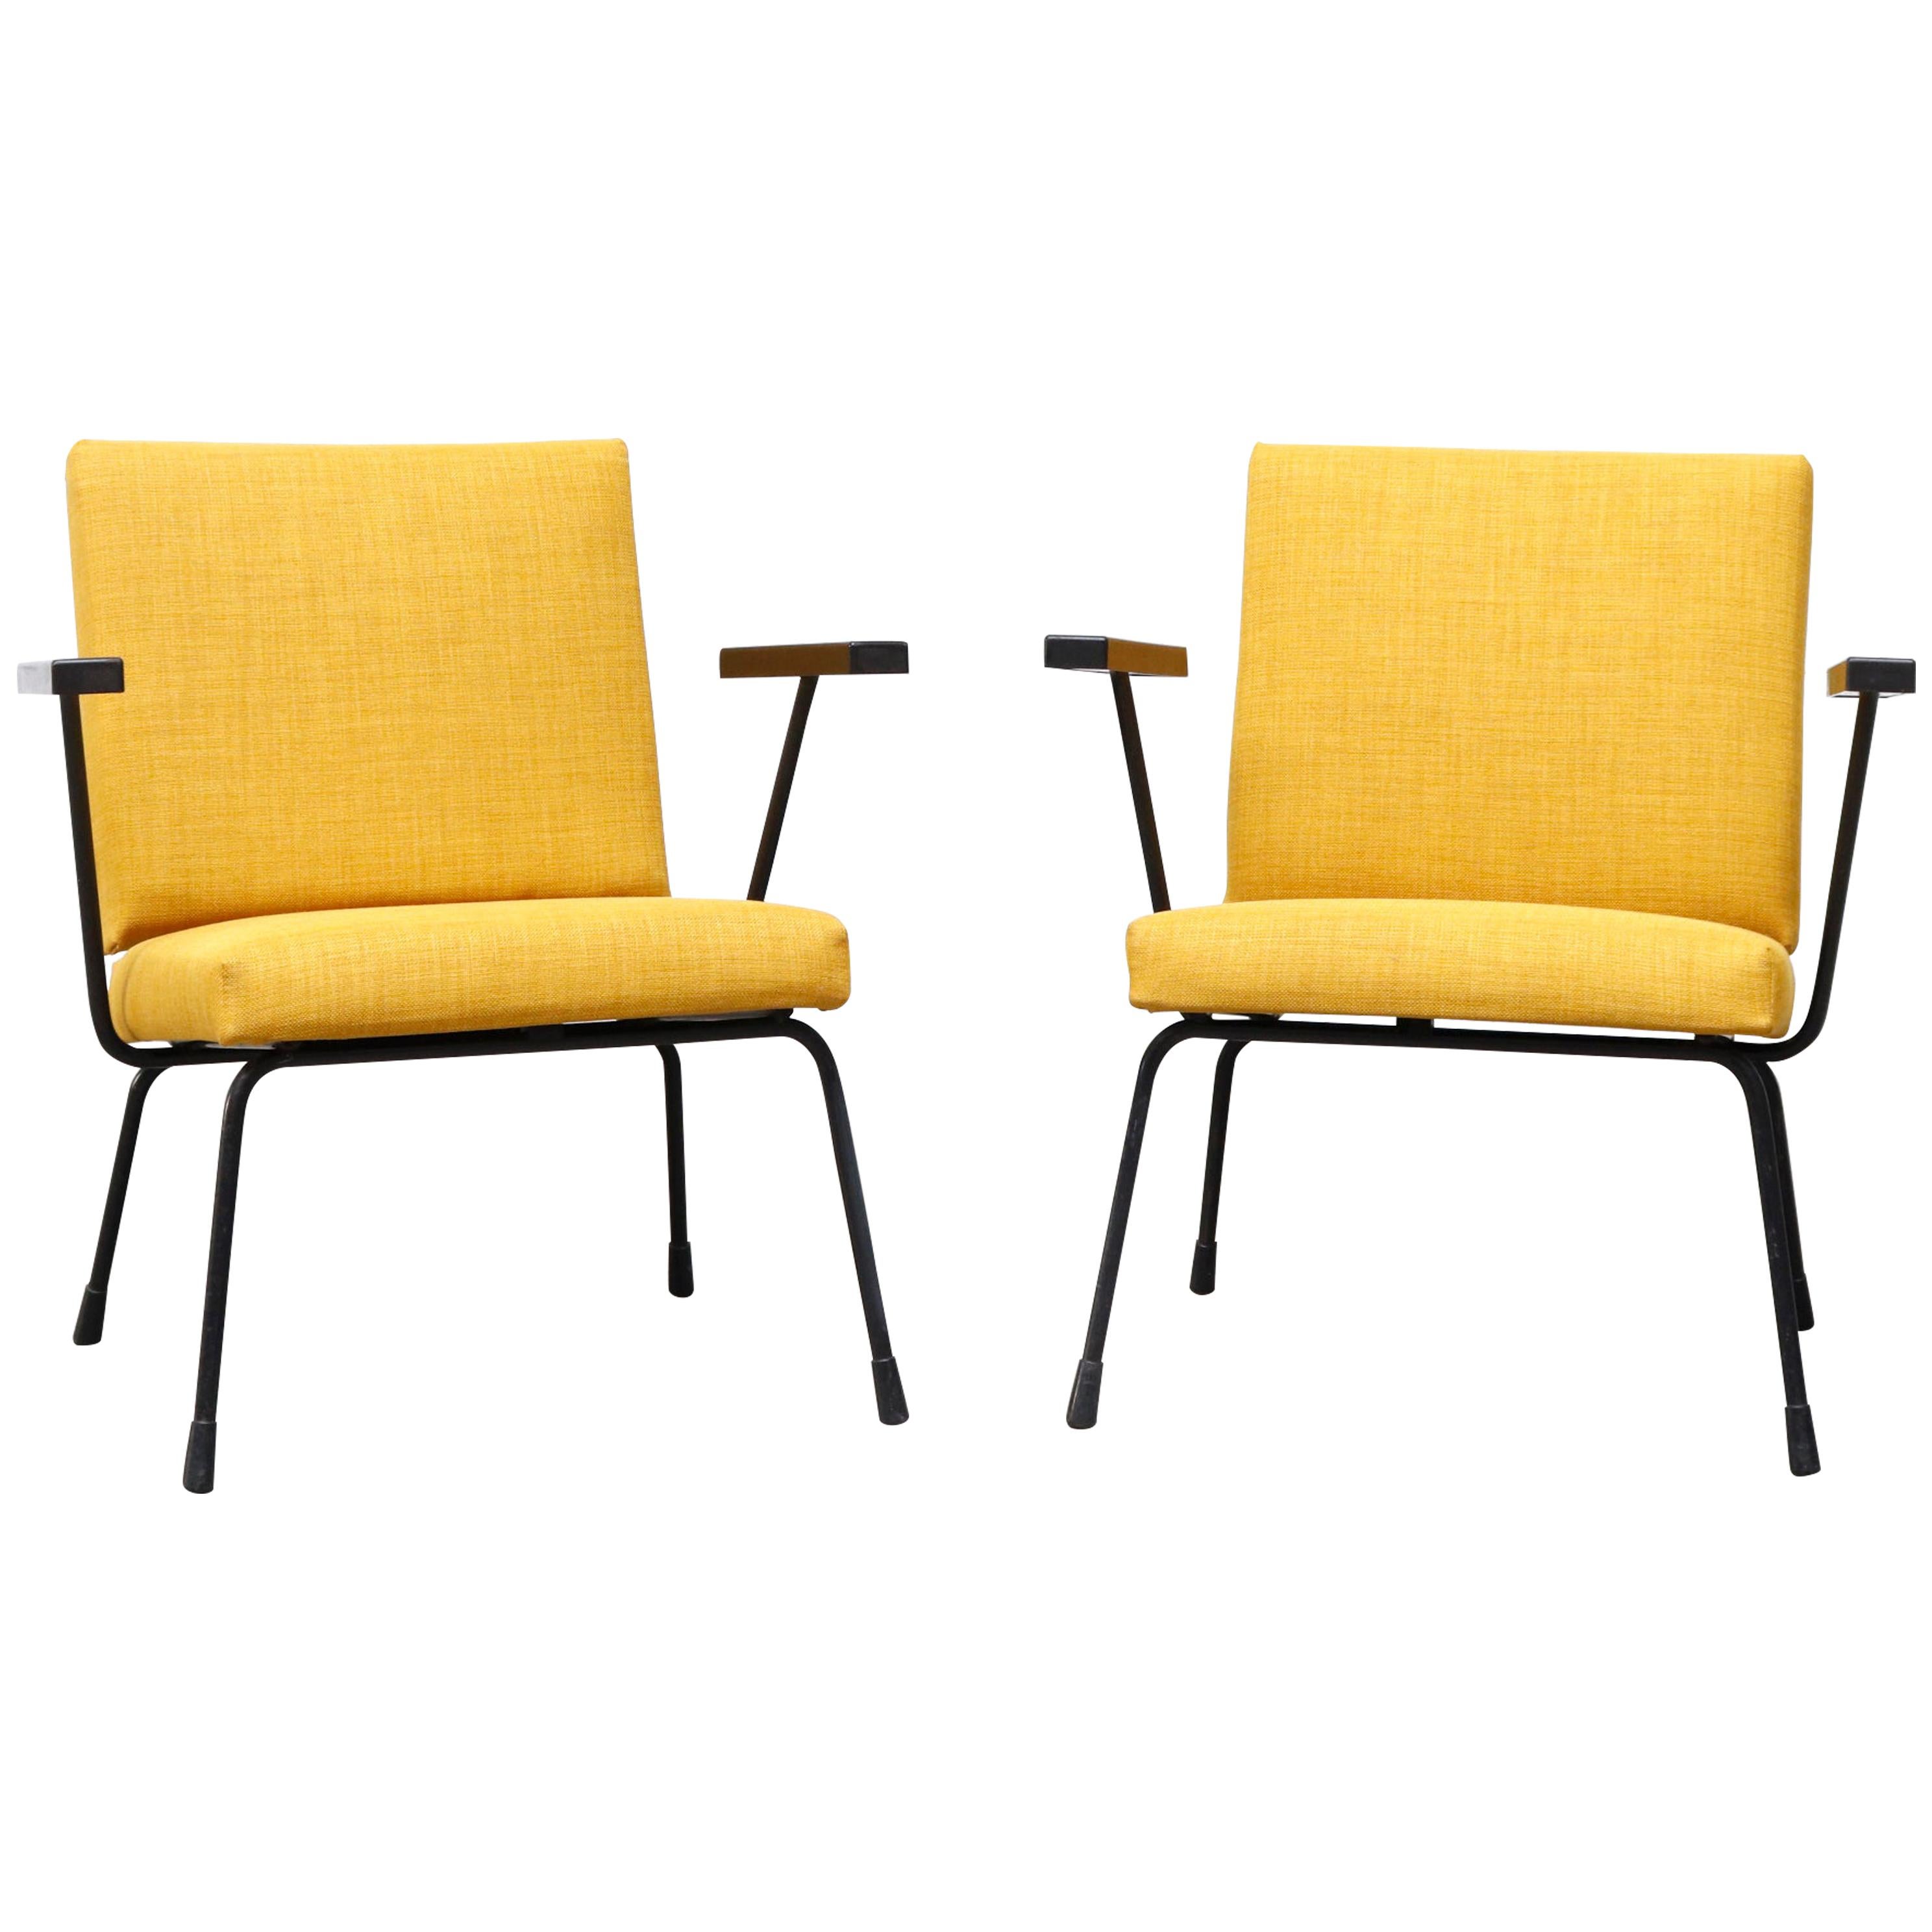 Pair of Wim Rietveld No 1401 Chairs for Gispen